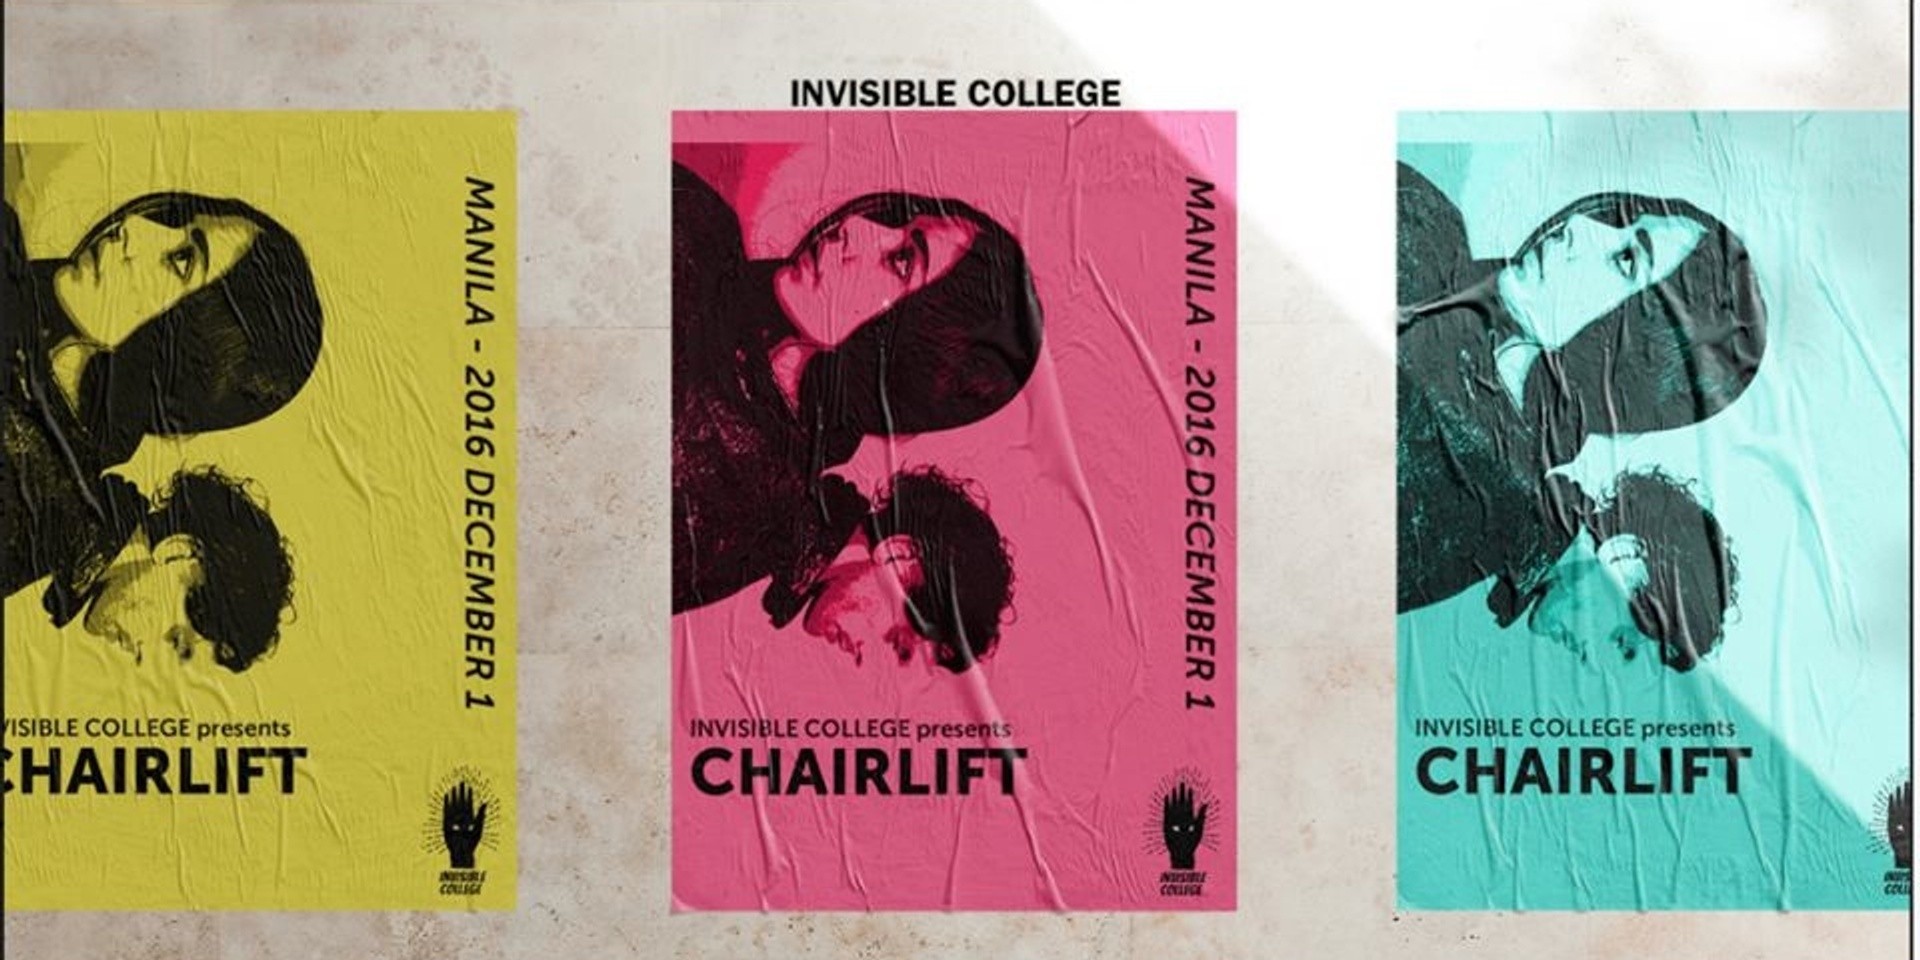 The Invisible College makes Manila debut with American synth pop duo Chairlift